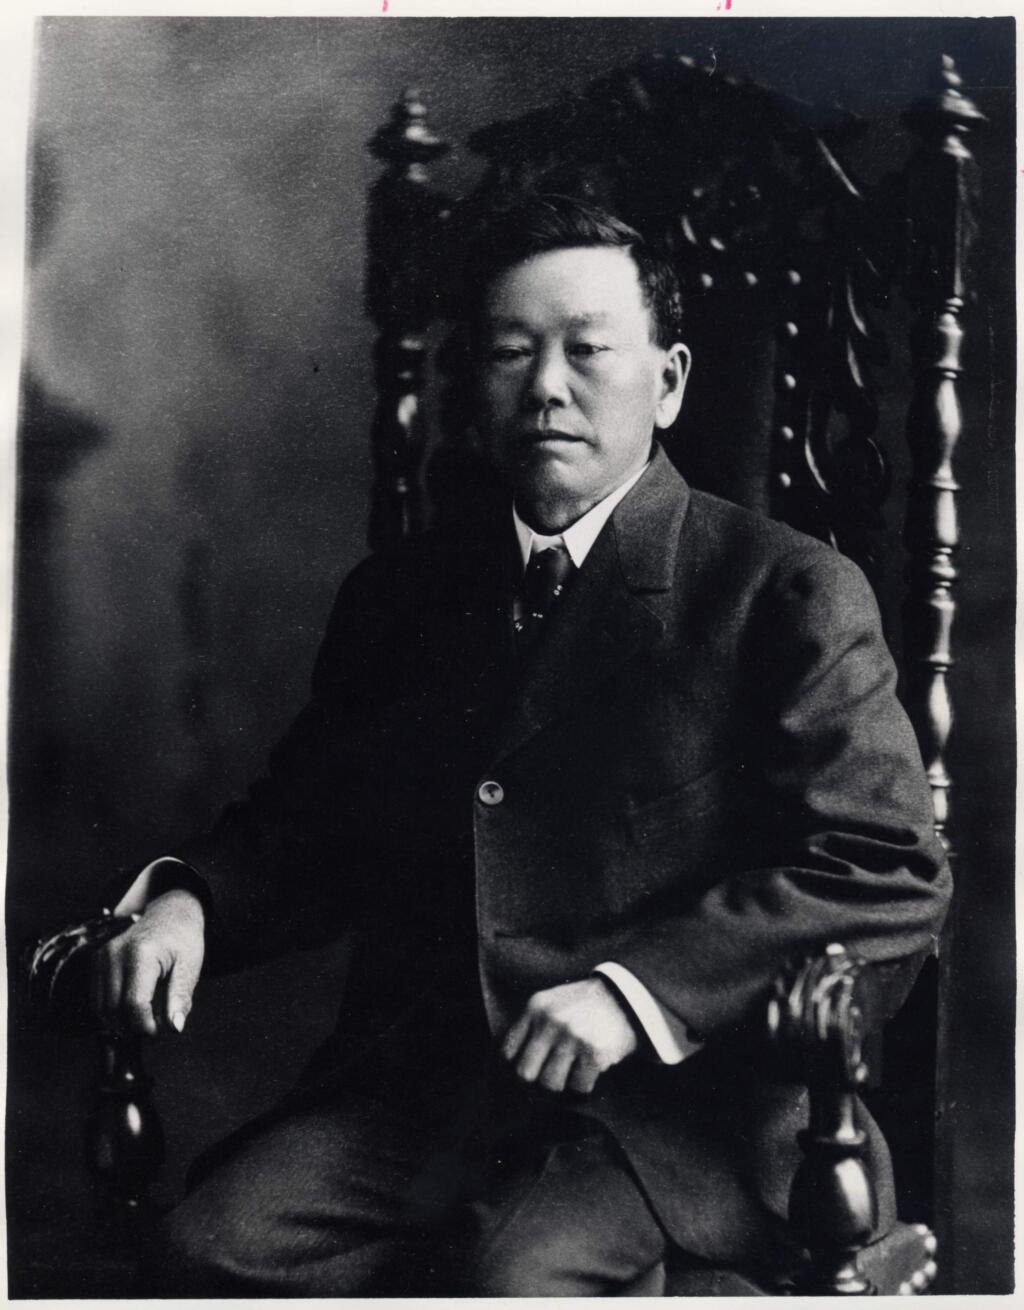 Santa Rosa winemaker and rancher Kanaye Nagasawa, circa 1920. Nagasawa was born of a samurai lineage in Japan, educated in Europe and was arguably the first Japanese immigrant to the United States. (Courtesy photo)